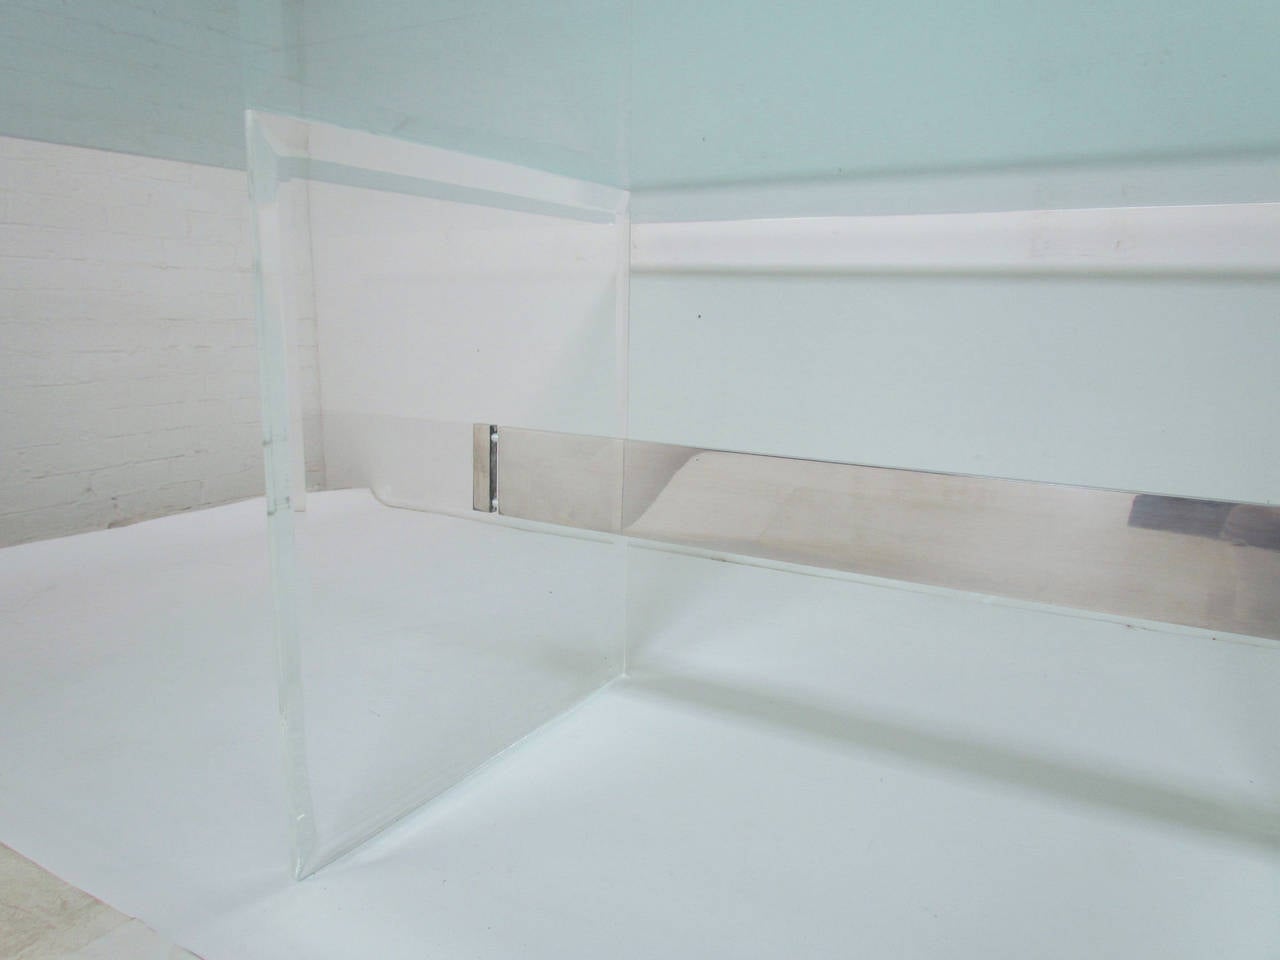 American Lucite and Aluminum I-Beam Dining Table with Square Glass Top, circa 1970s